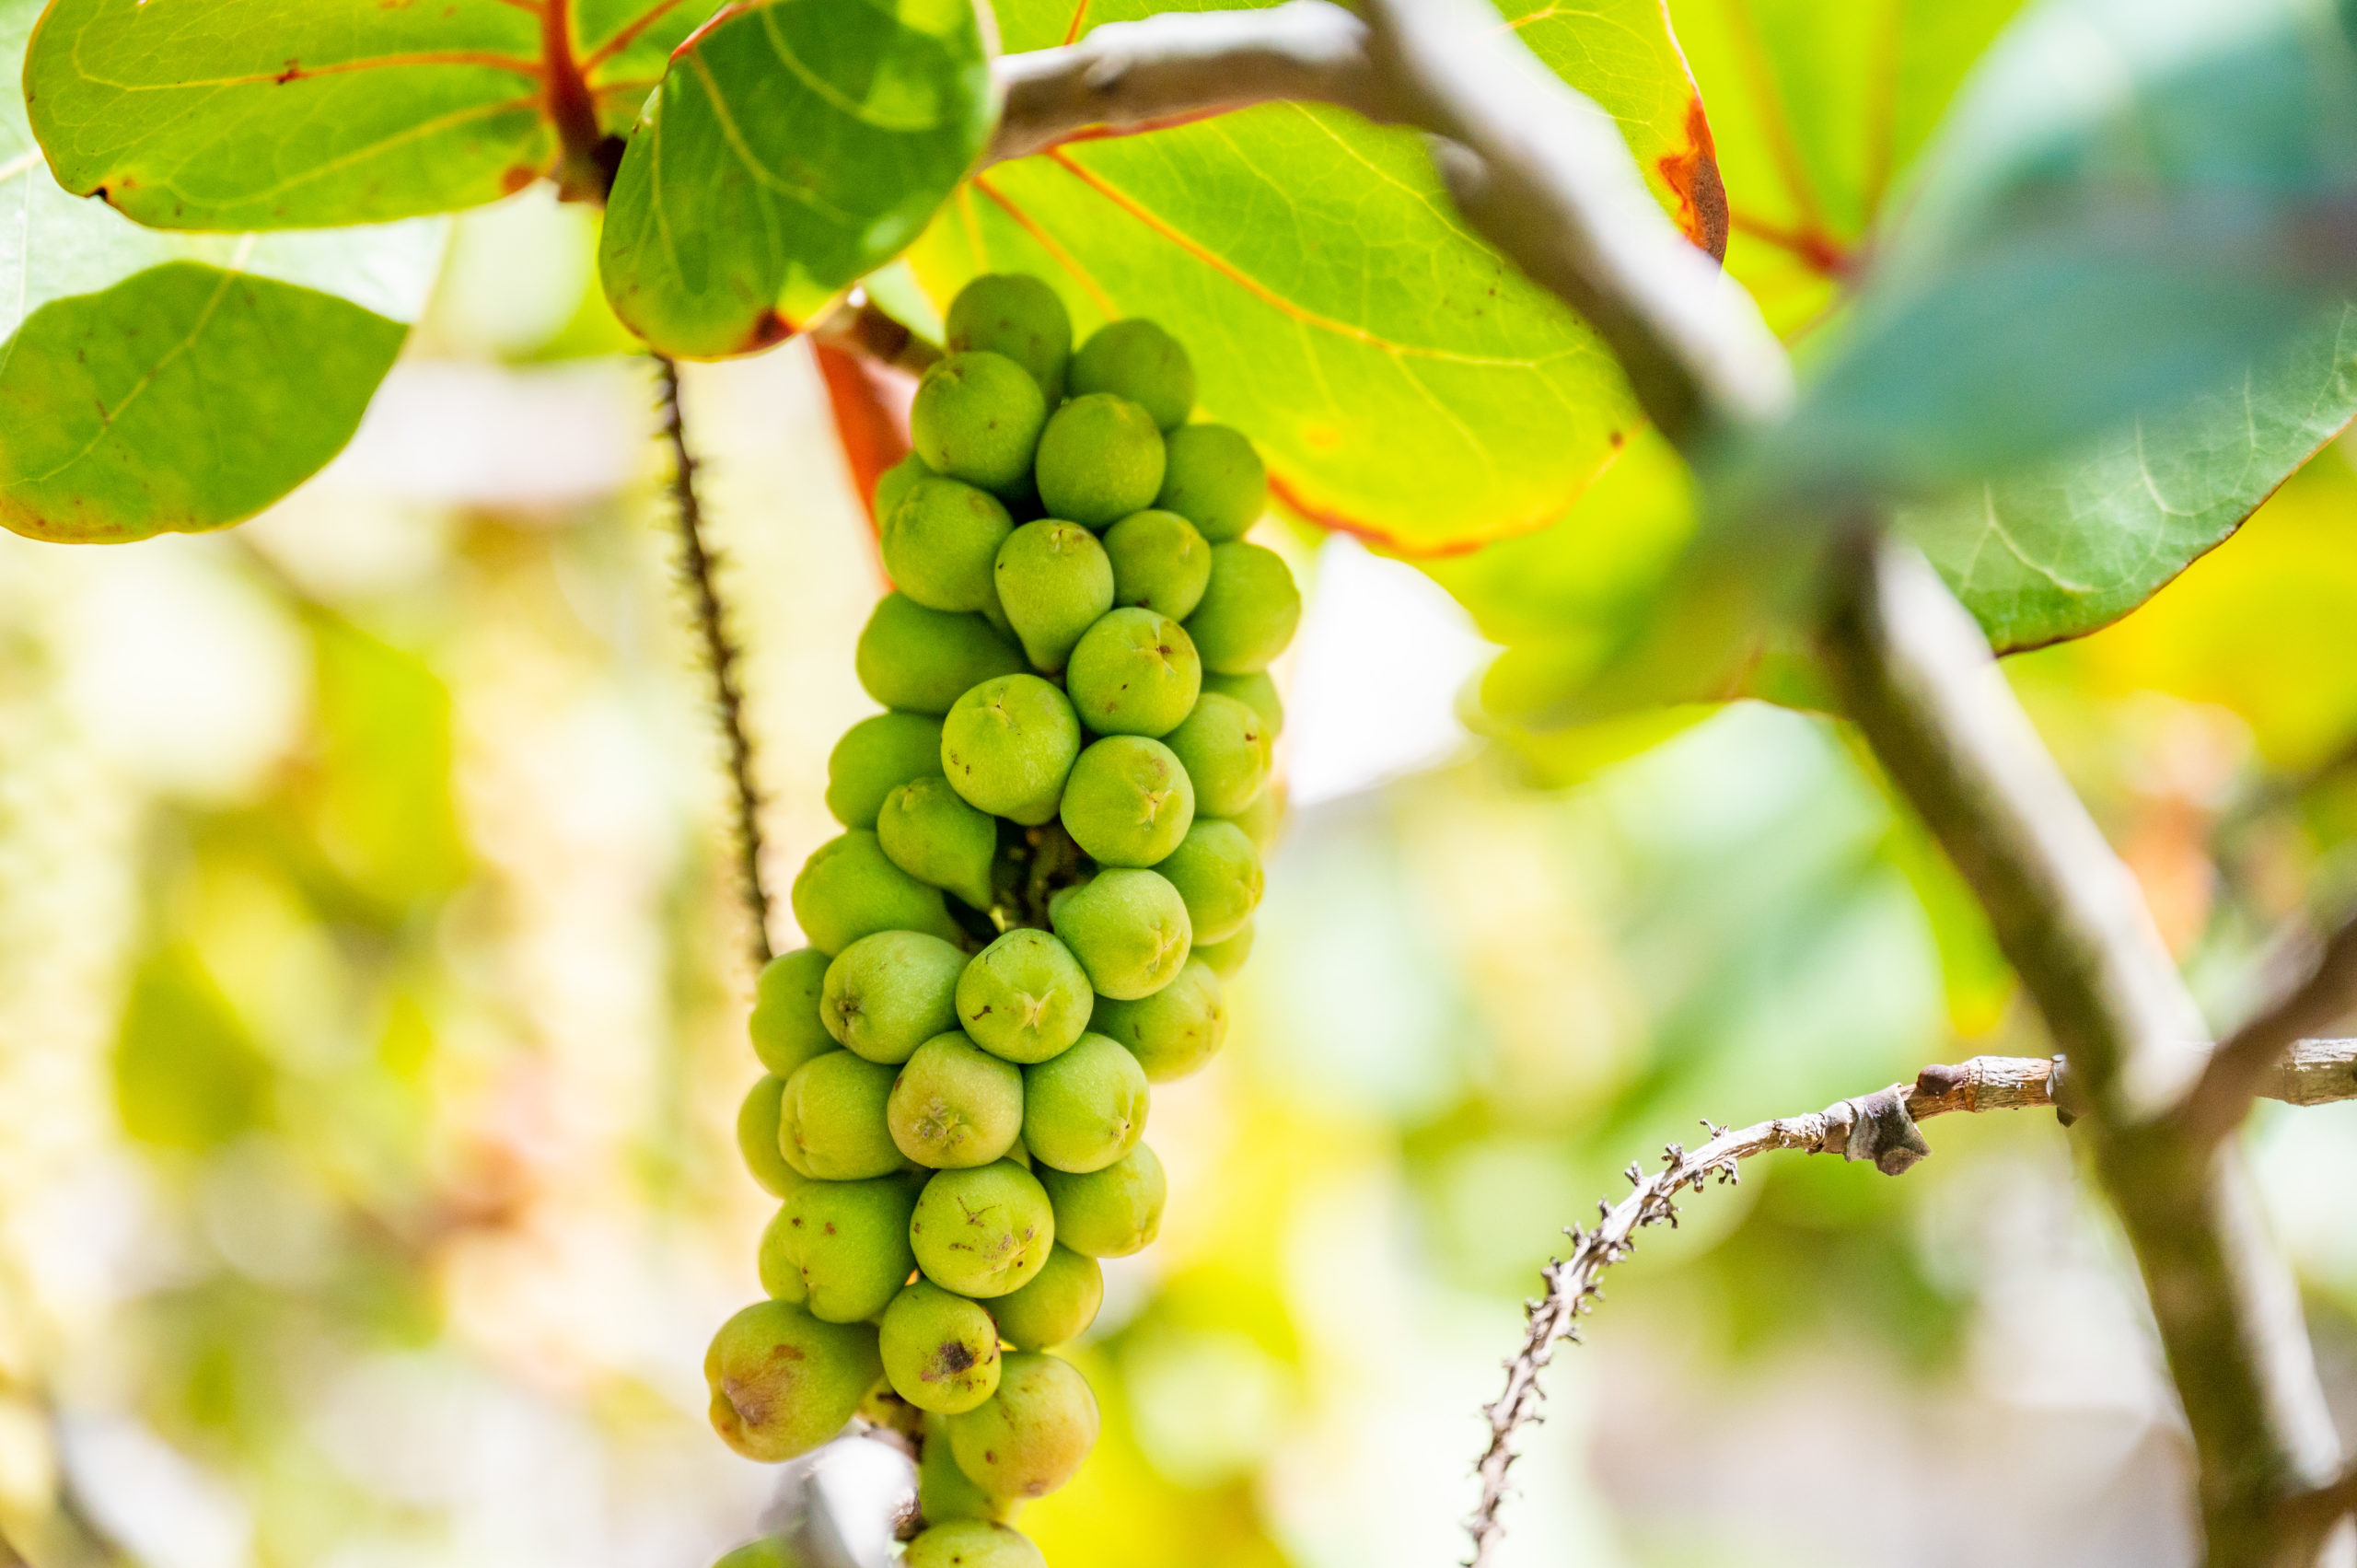 grapes tree images